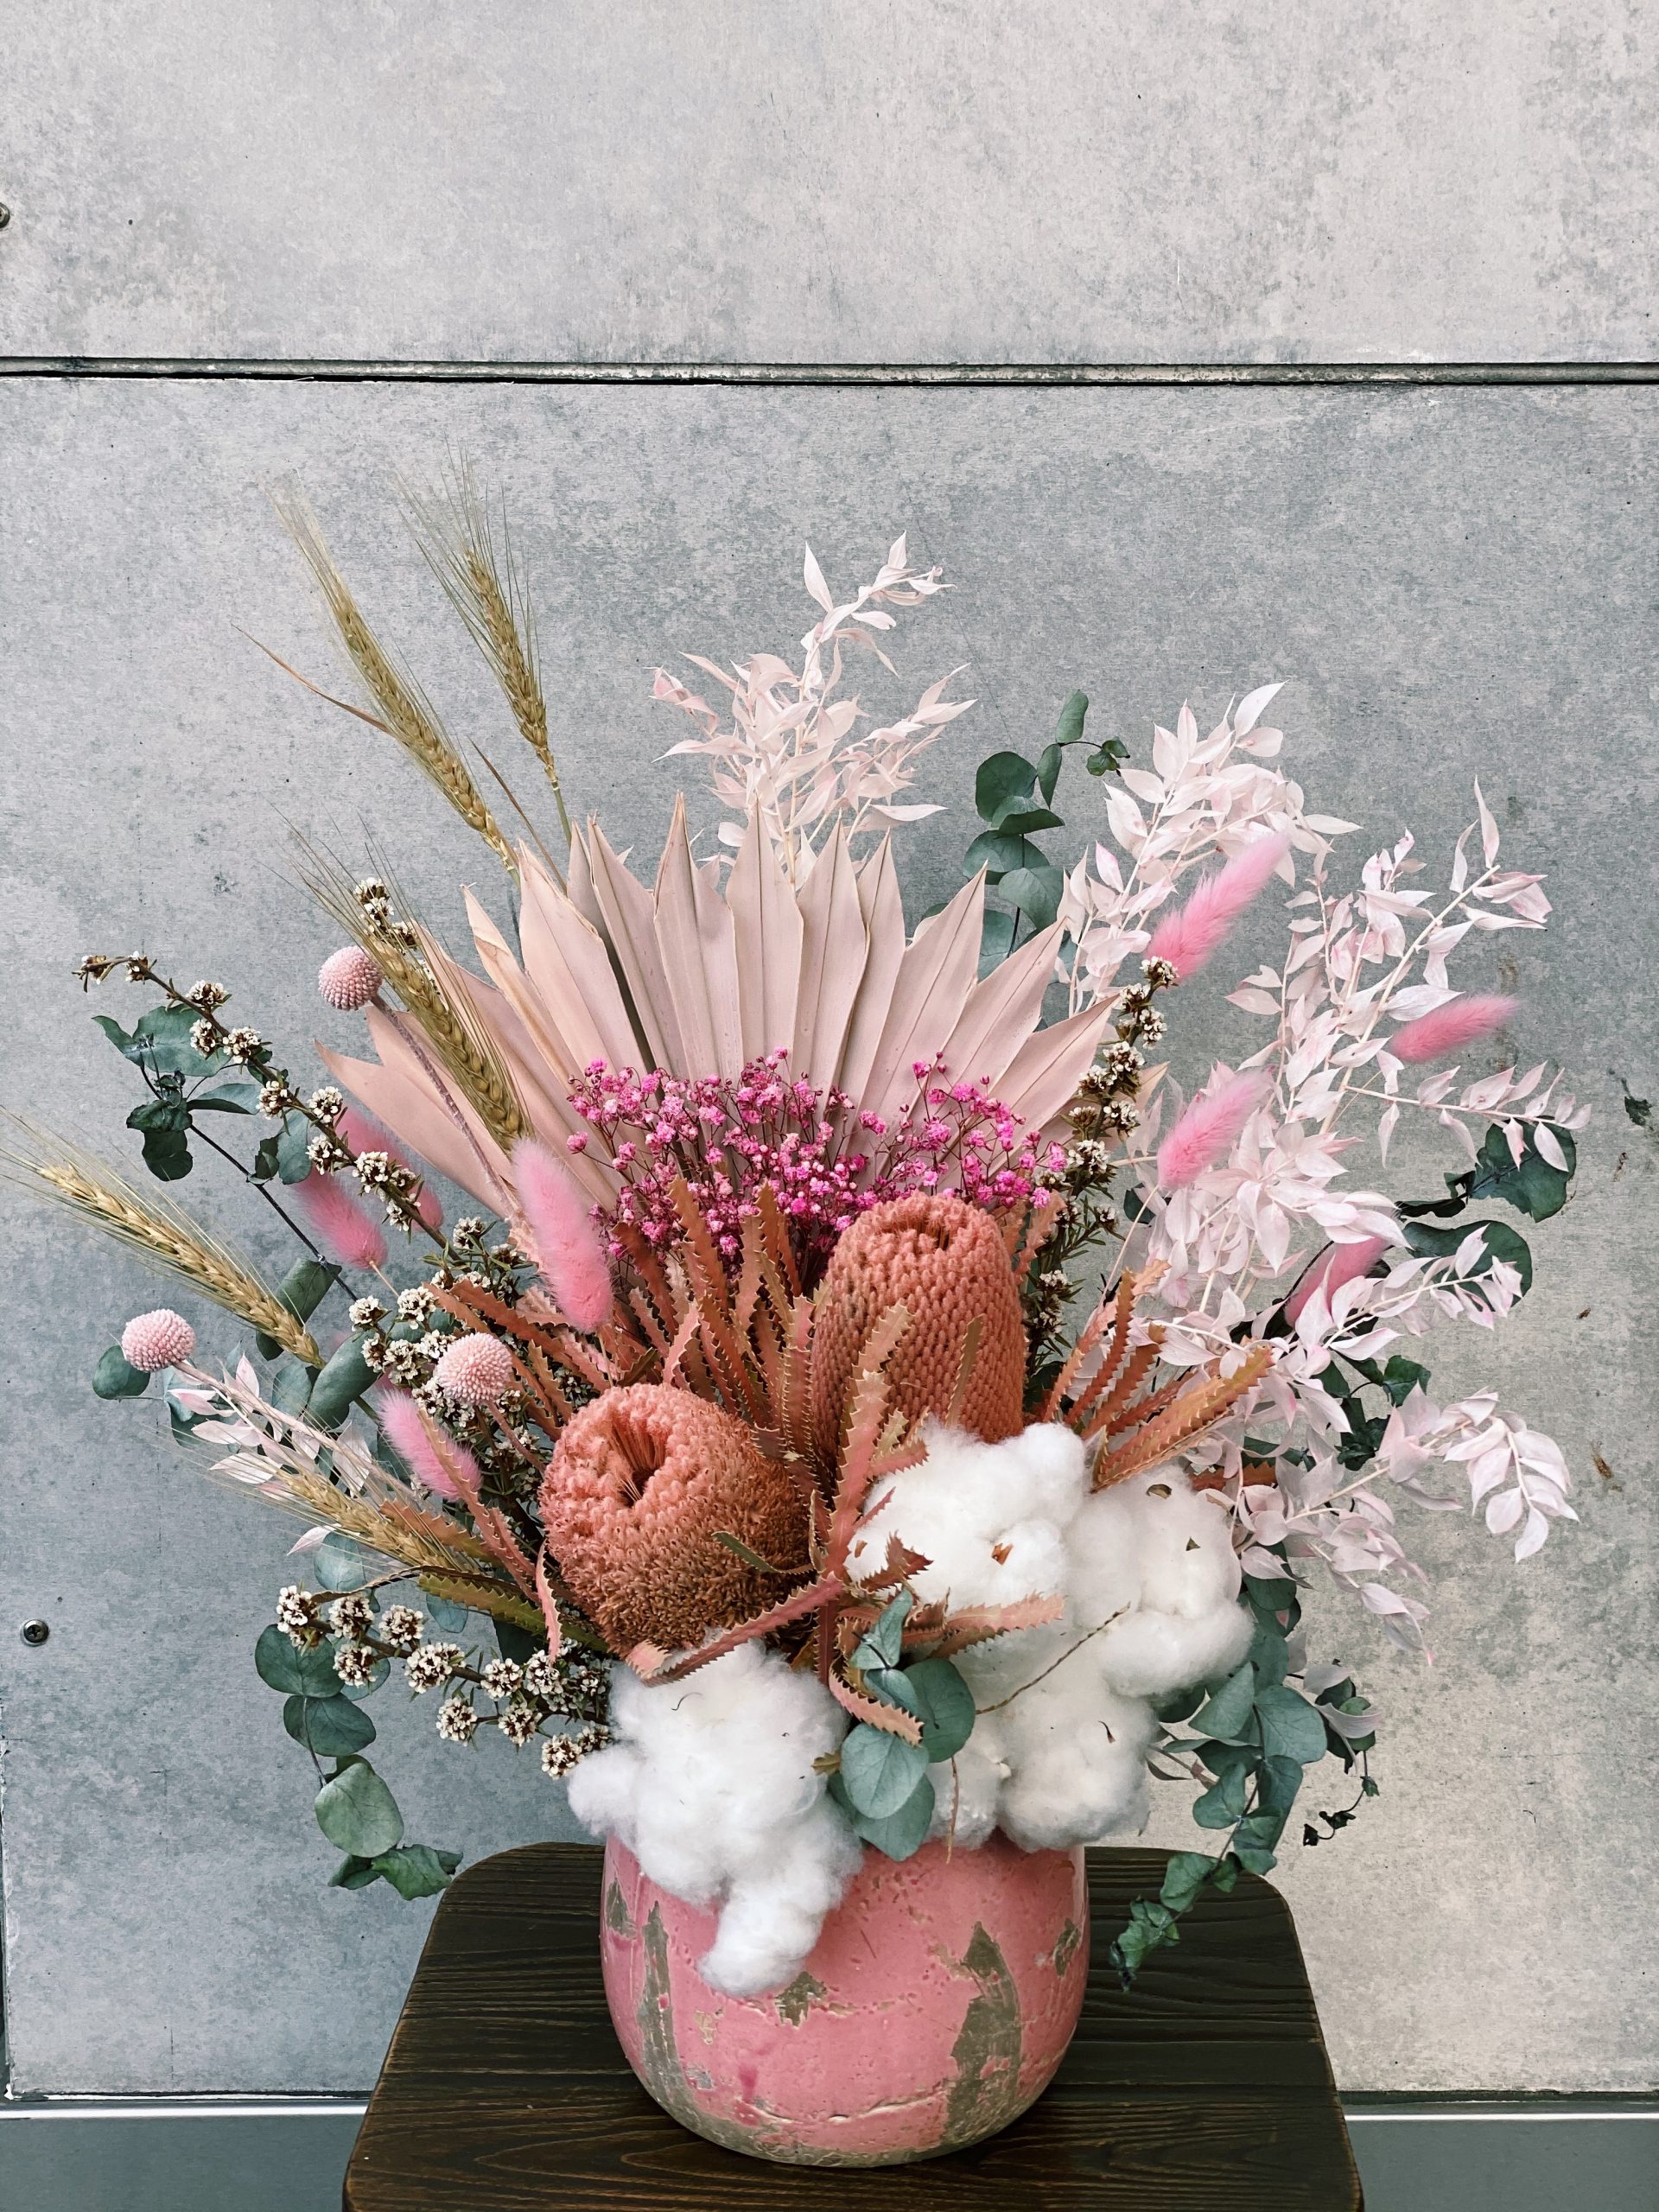 Magnificent Pink and White Dried and Preserved Arrangement - The Lush Lily  - Brisbane & Gold Coast Florist Flower Delivery - Carindale, Loganholme  Brisbane Gold Coast Buy flowers online